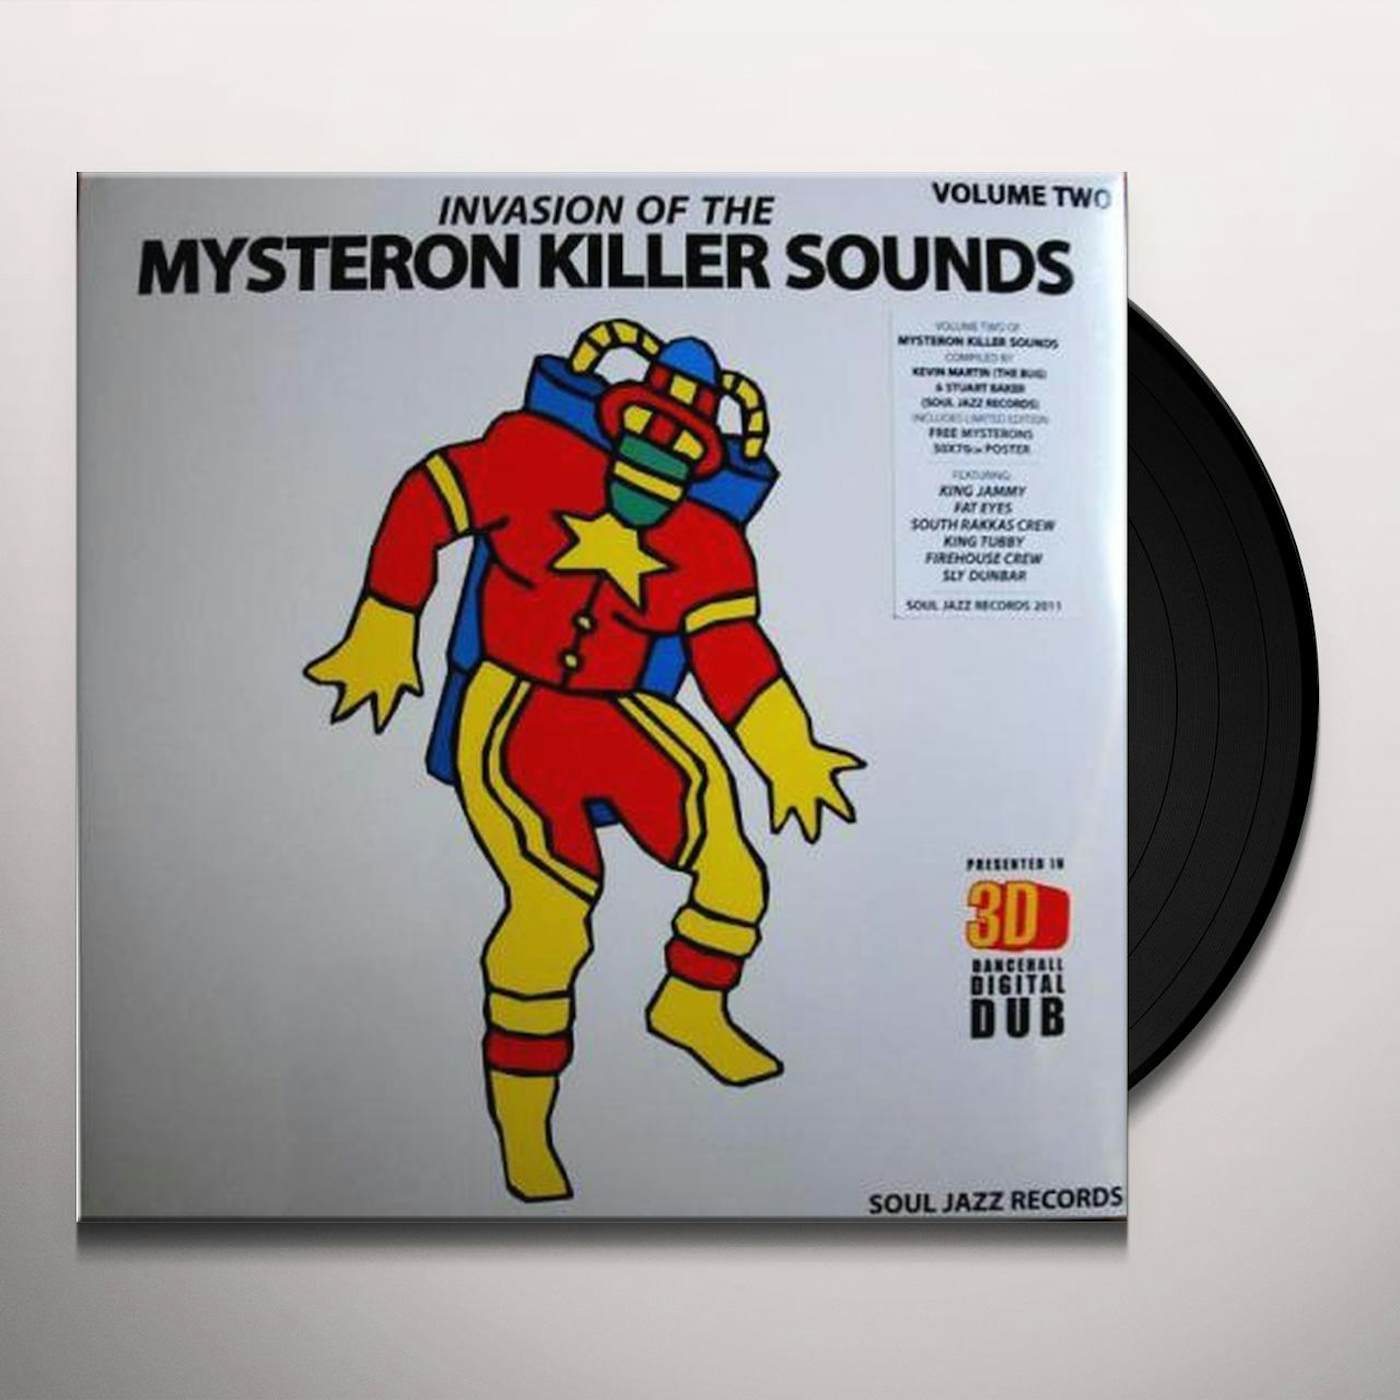 INVASION OF THE MYSTERON KILLER SOUNDS 2 / VARIOUS Vinyl Record